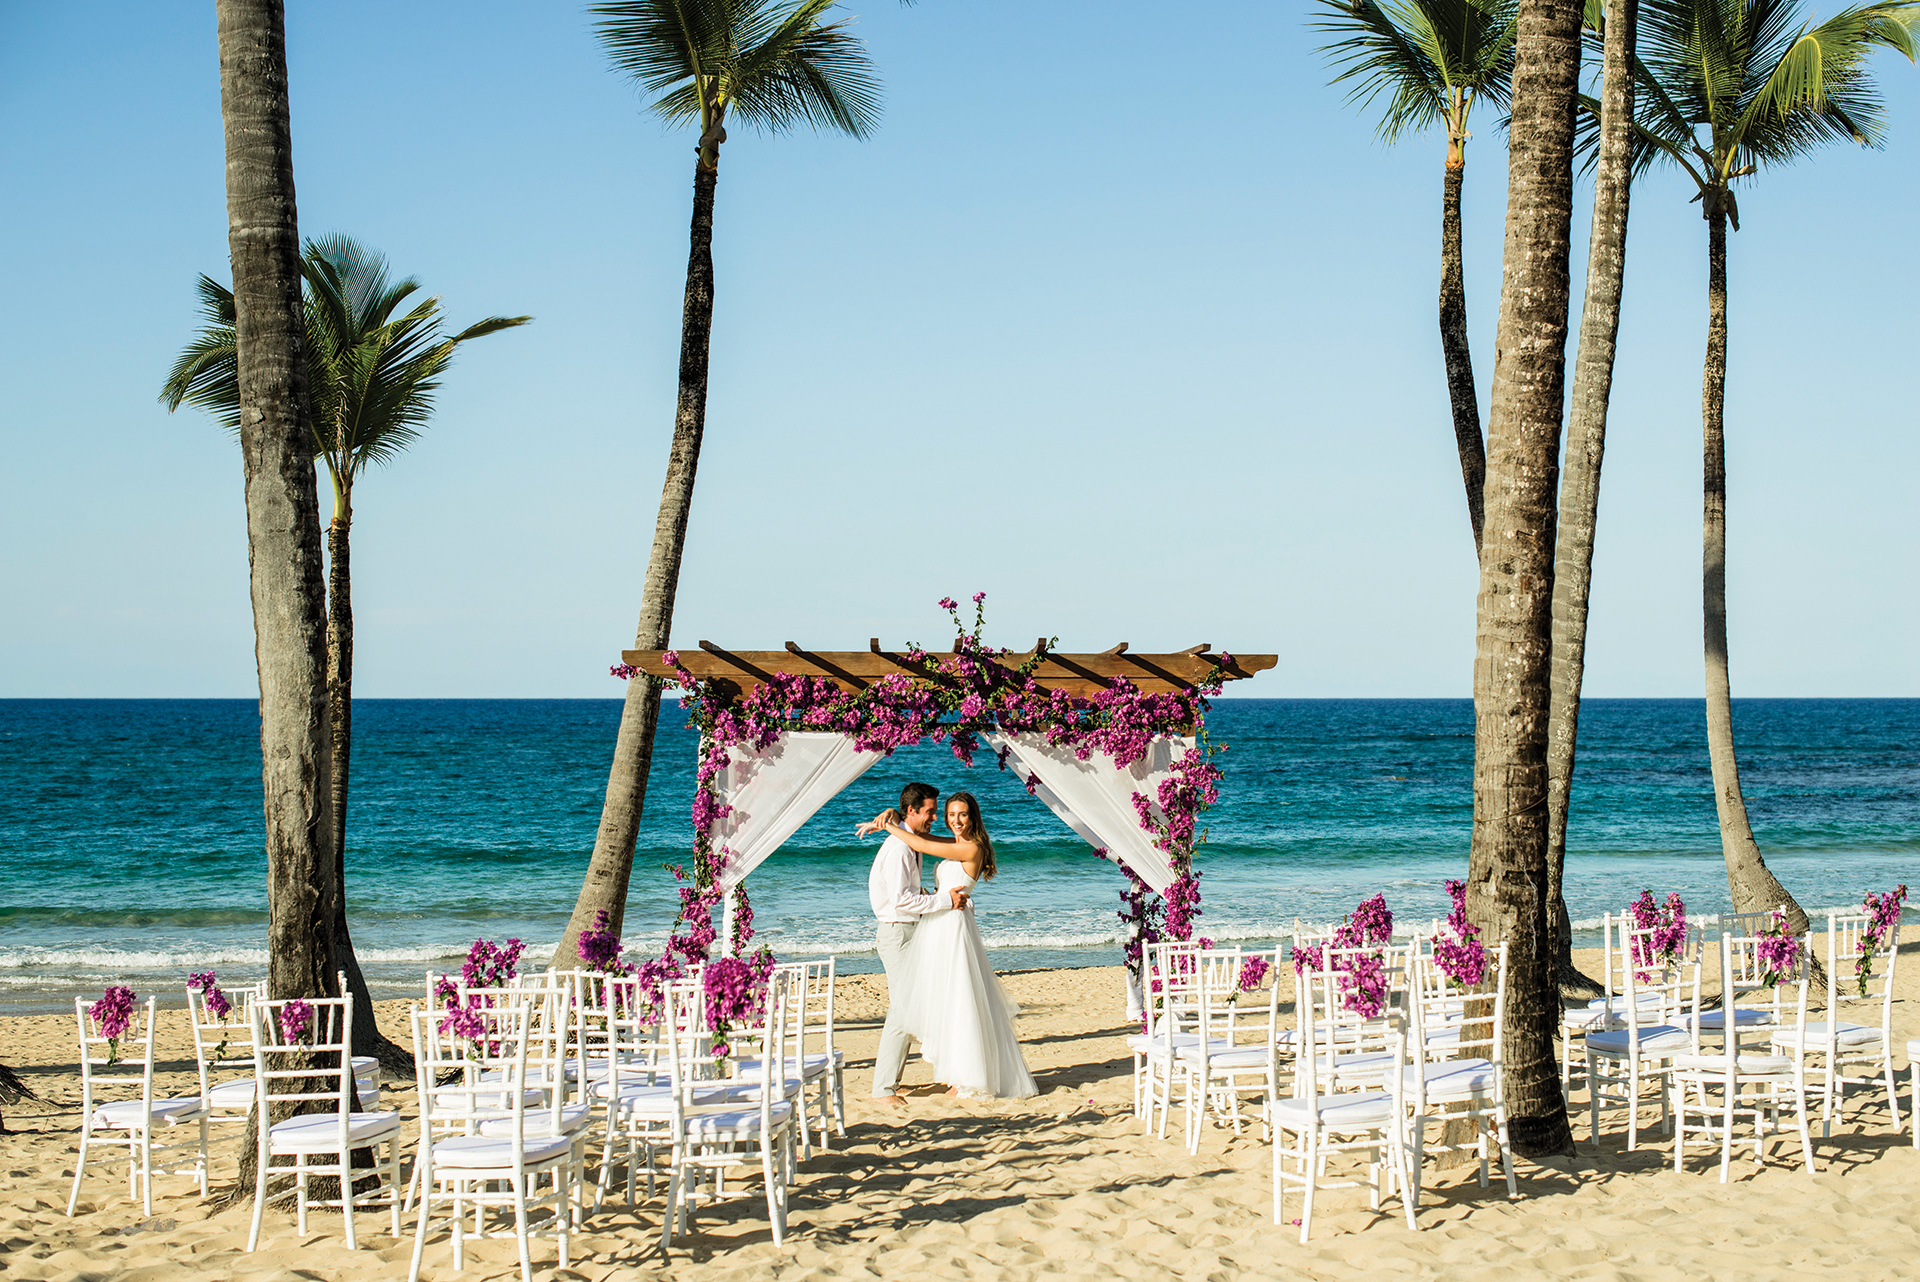 Wedding Trends For Your Caribbean wedding